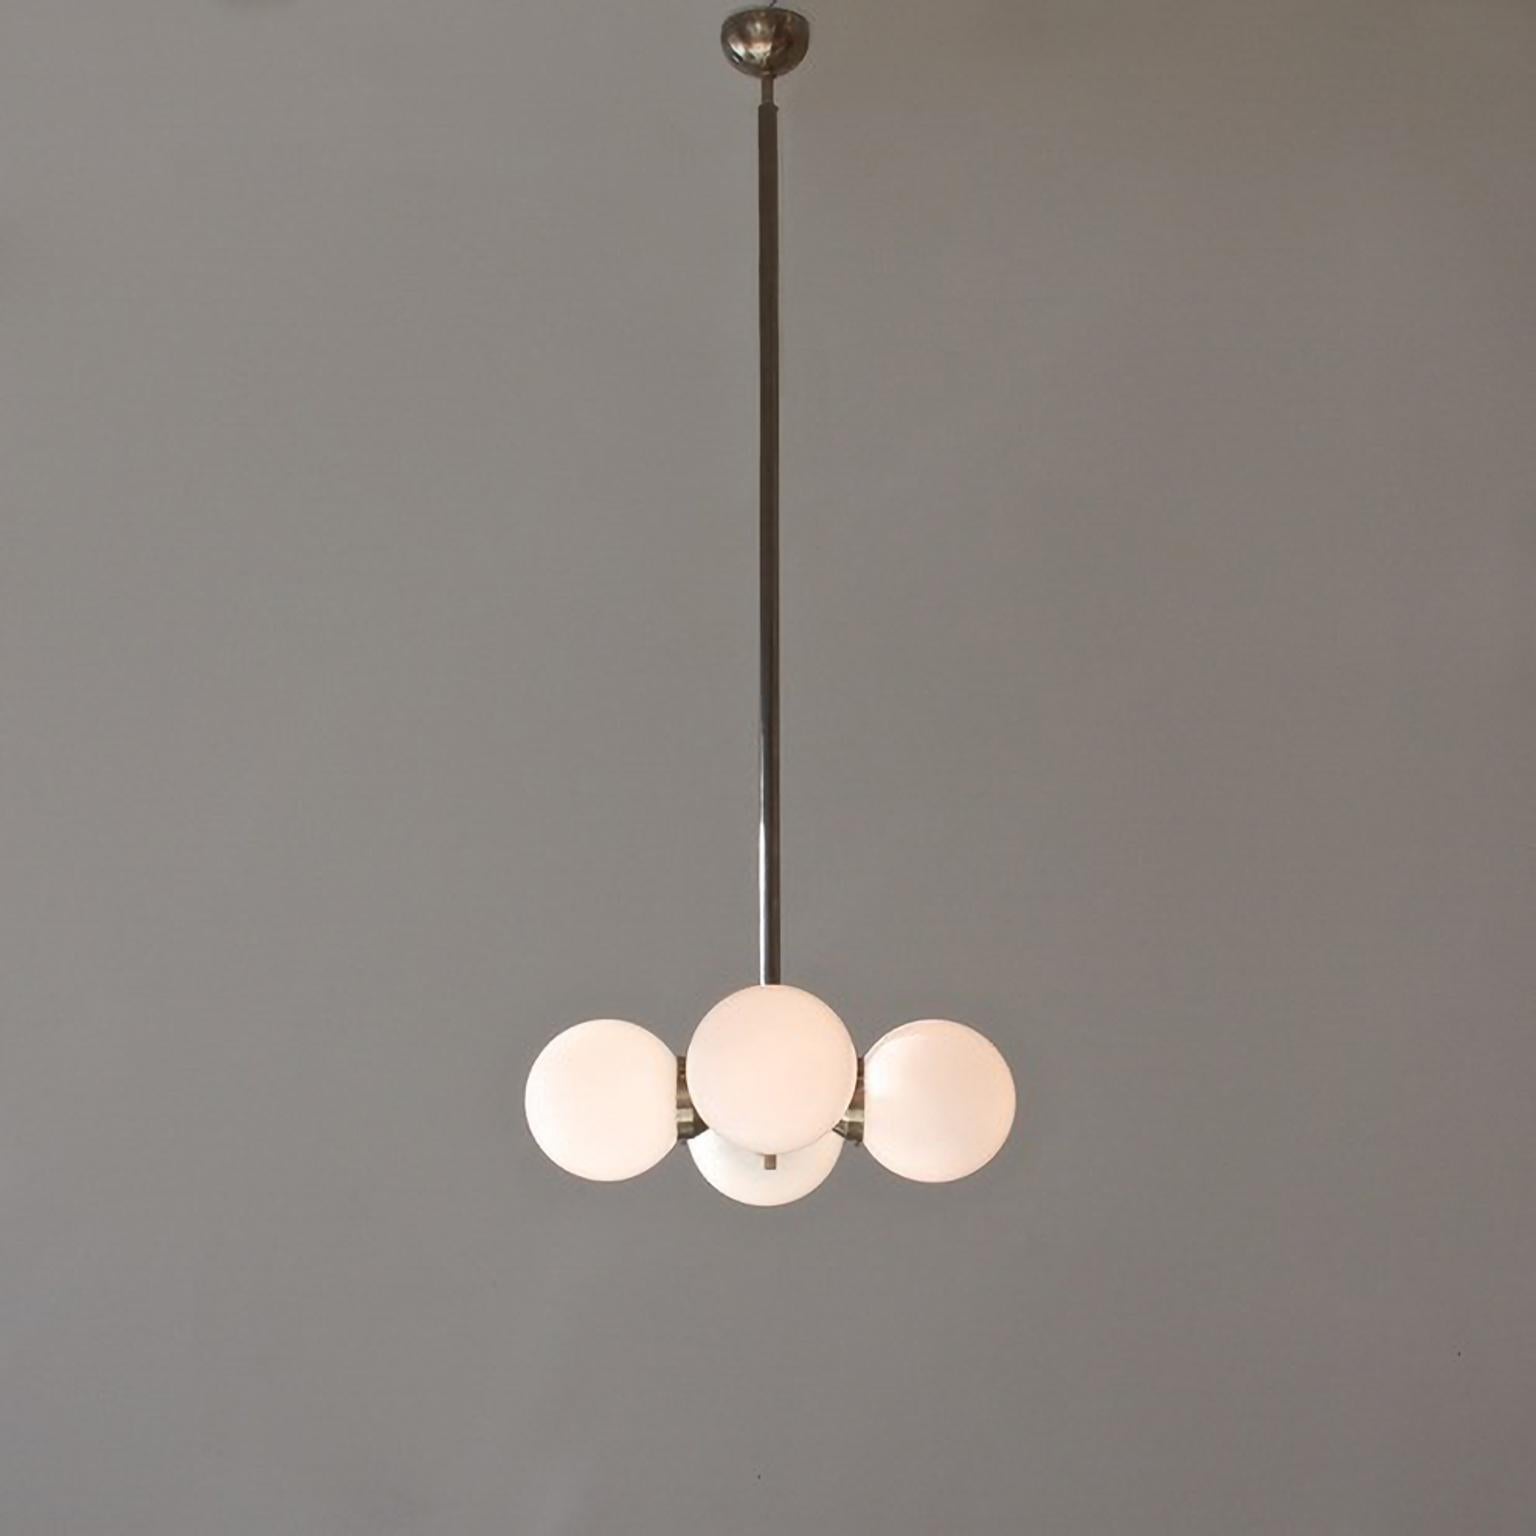 Modernist Pendant Light with 4 Opaline Glass Bulbs, Nickel Plated Brass c. 1930 In Good Condition For Sale In Berlin, DE